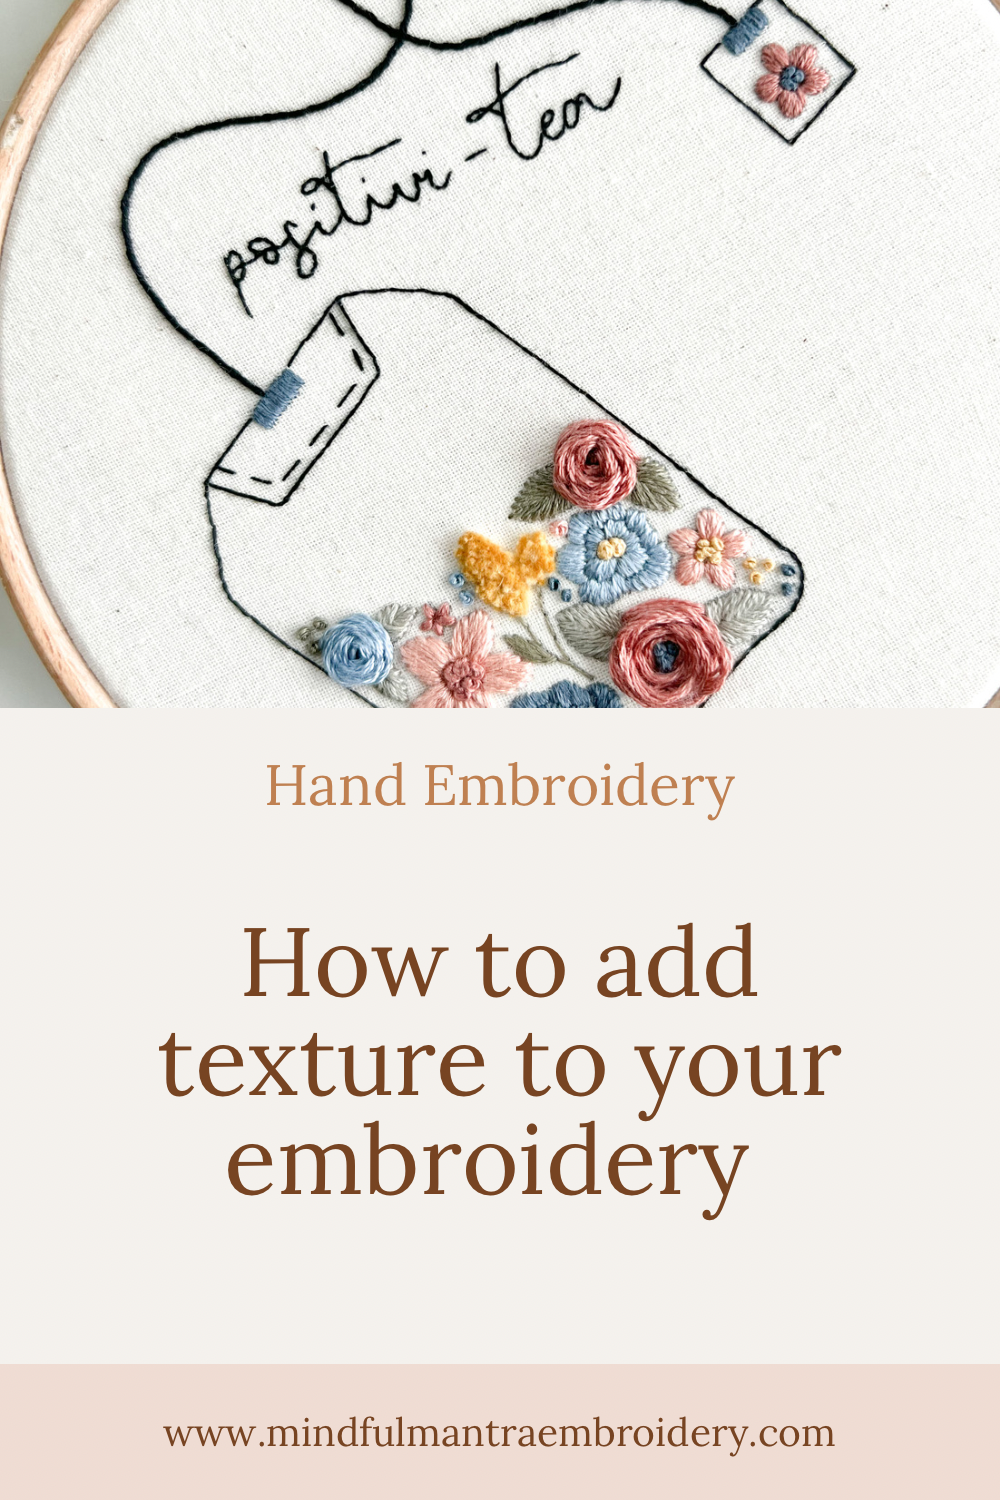 How to Create Texture in Hand Embroidery